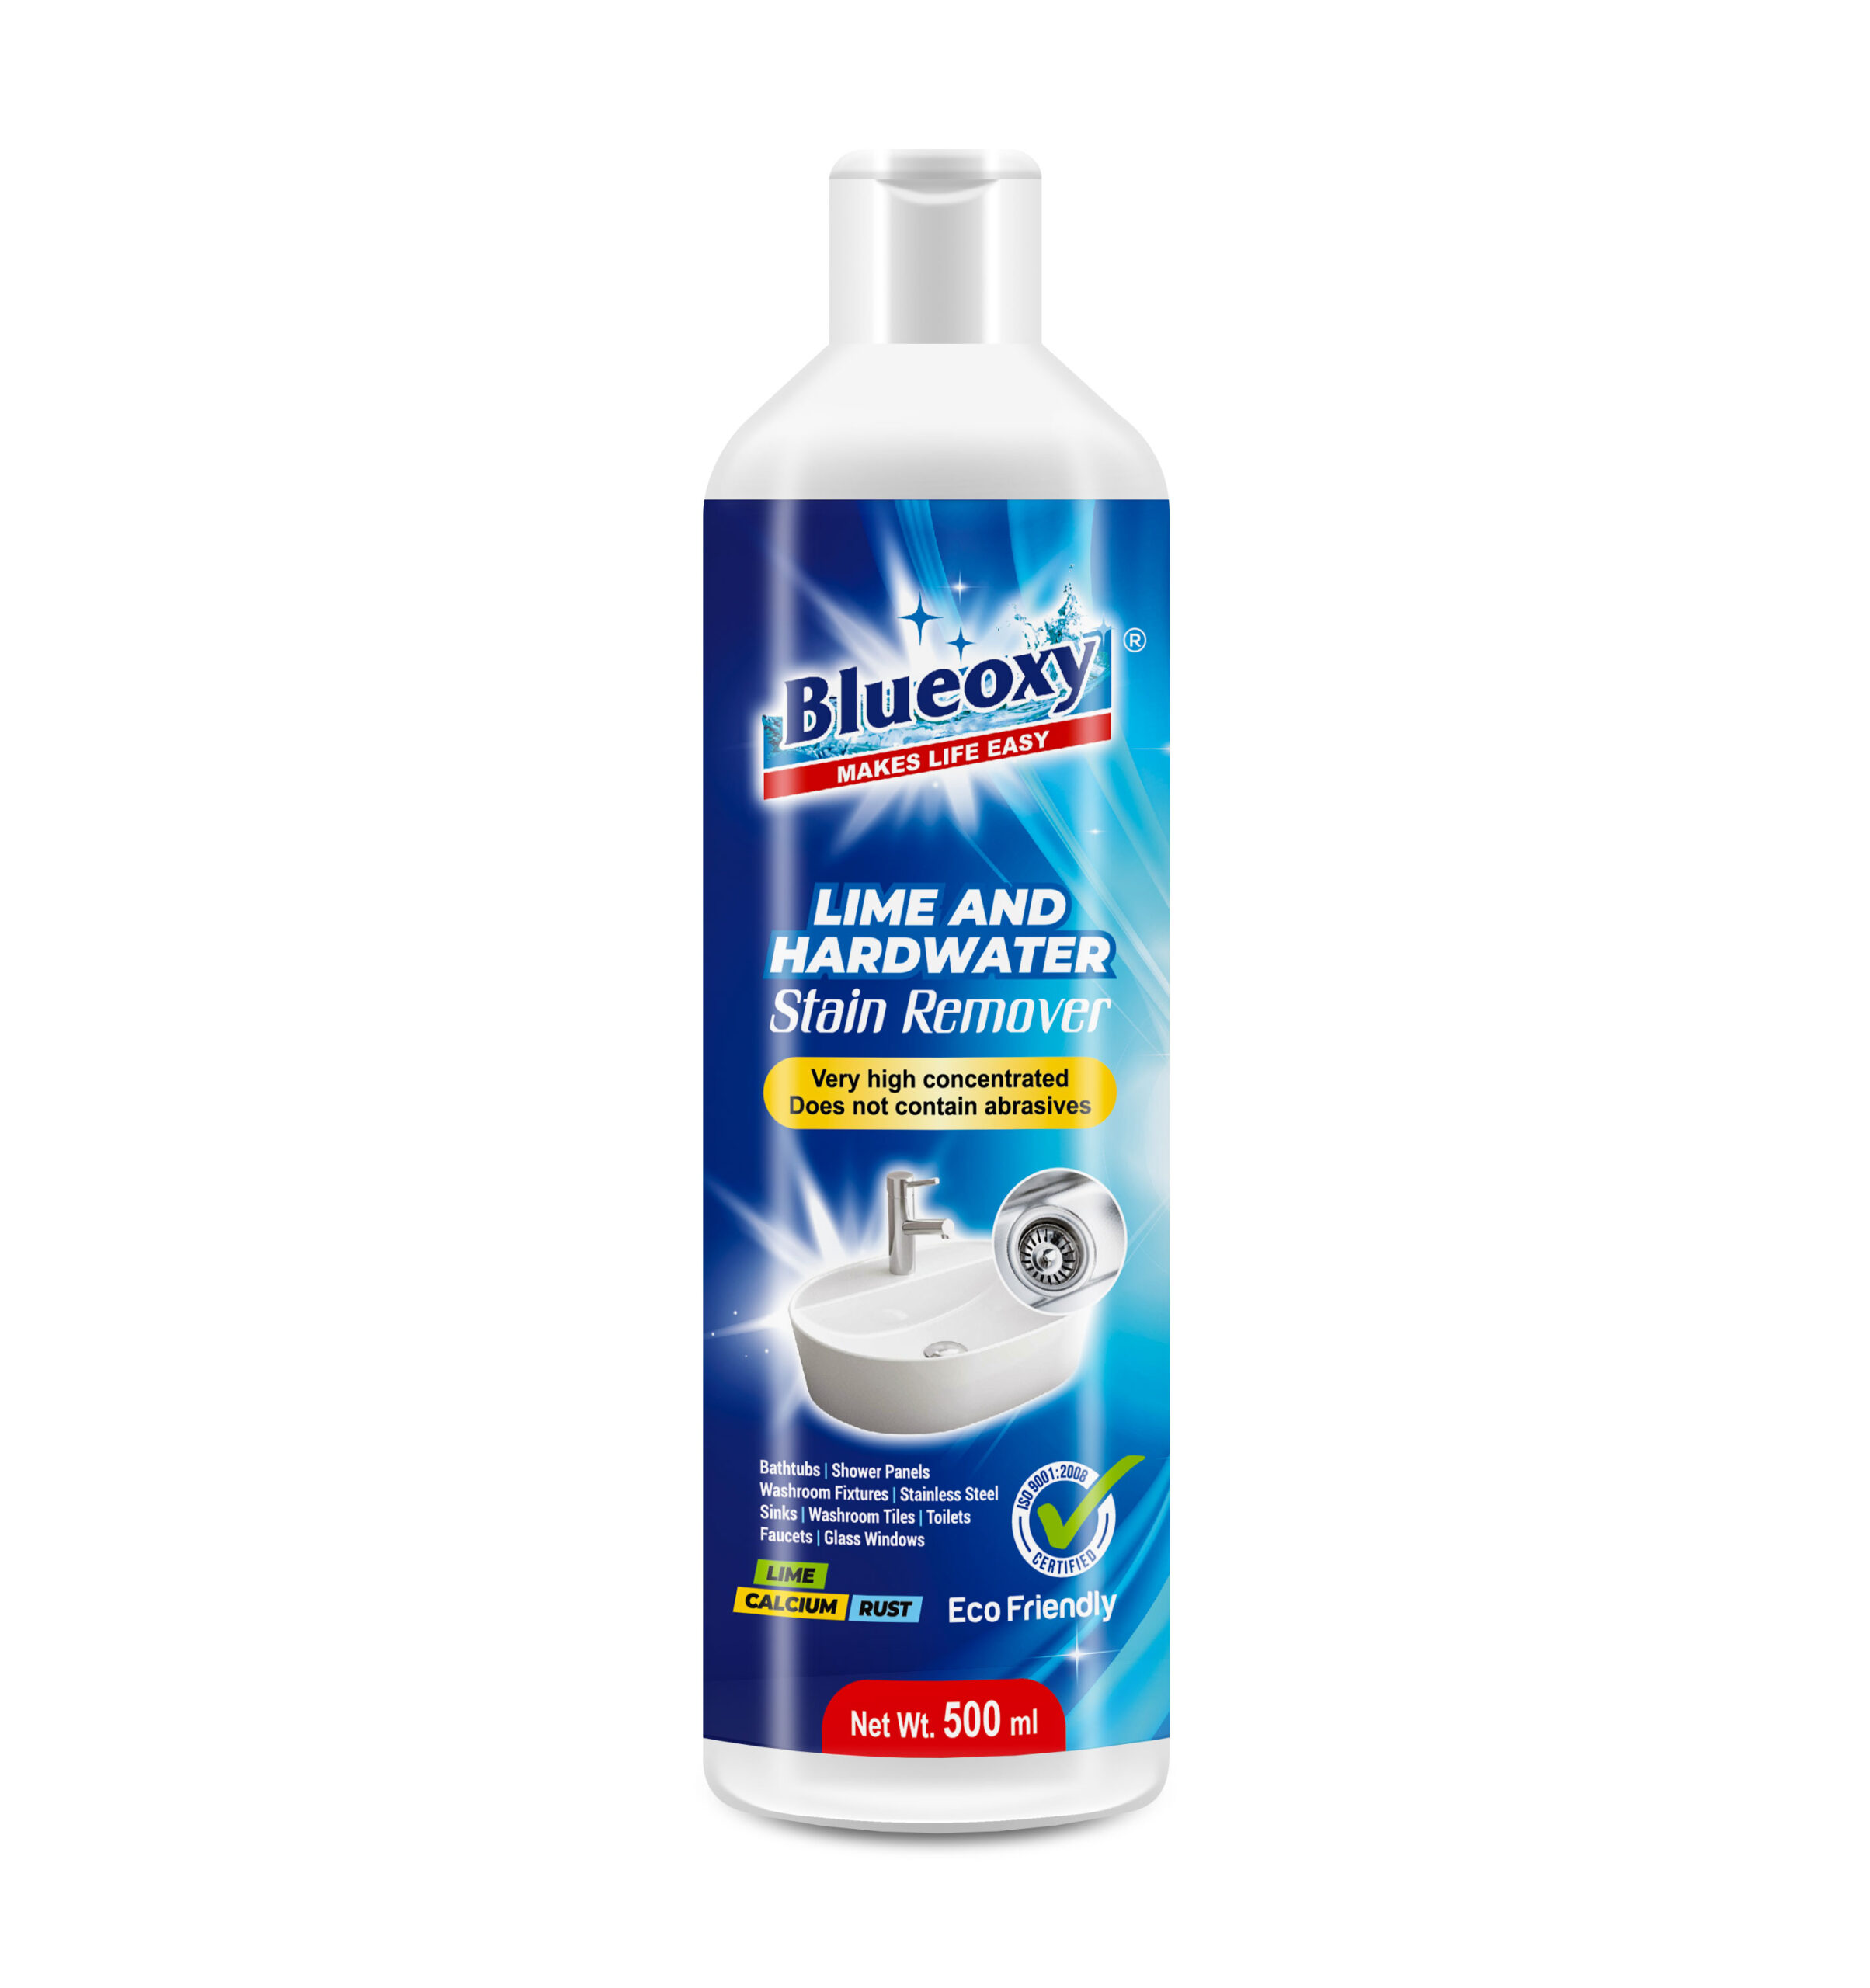 Blueoxy Lime & Hardwater Stain Remover 500 ml – Concentrate: Your